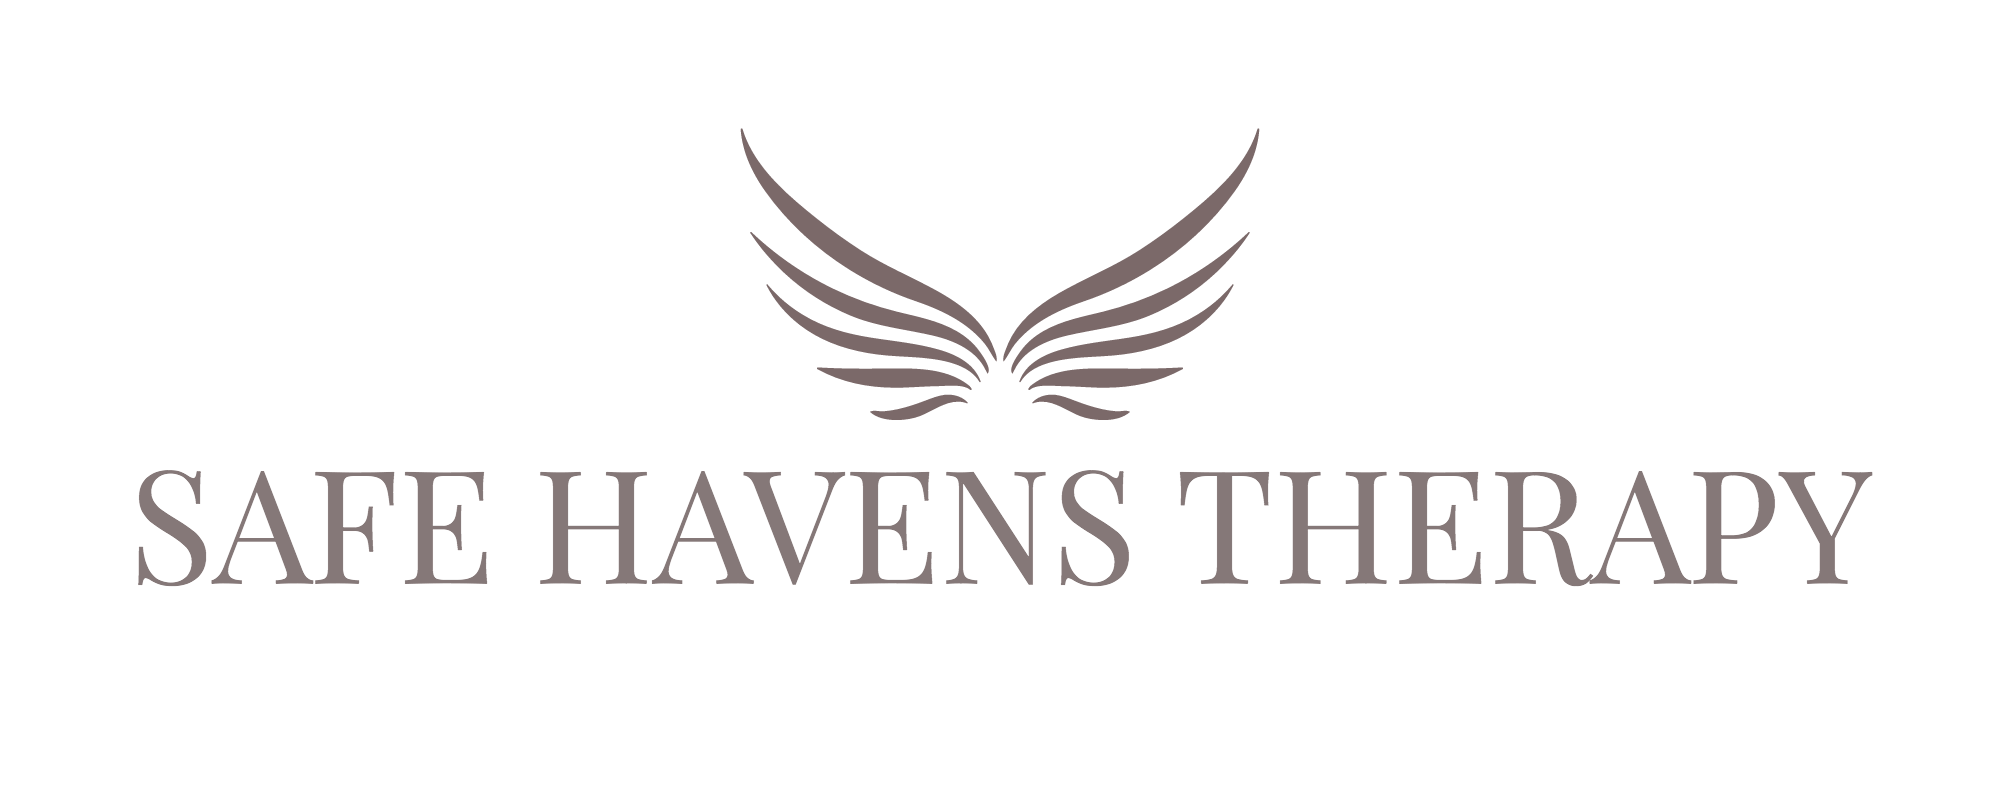 SAFE HAVENS THERAPY